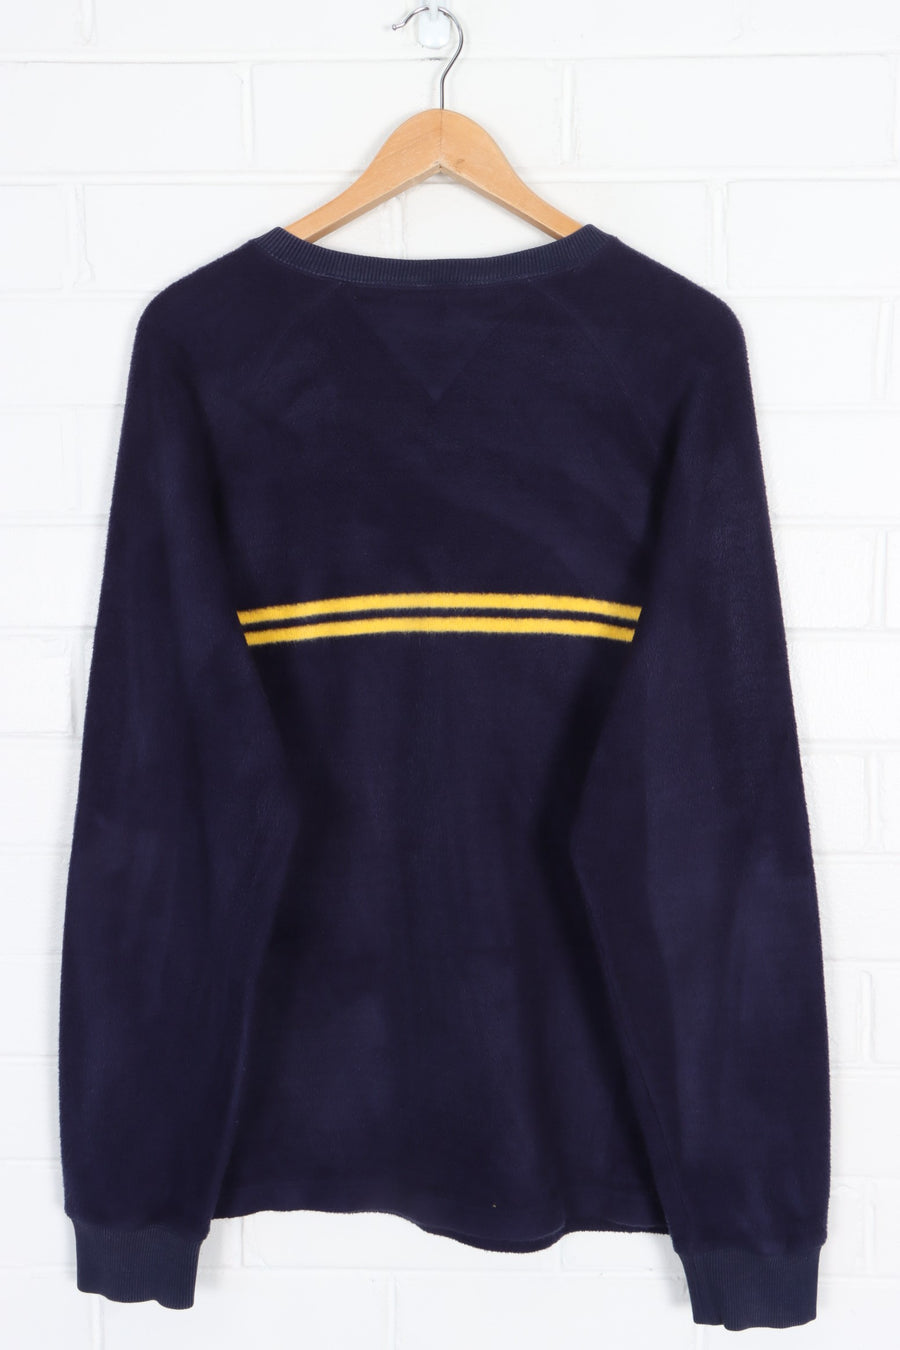 TOMMY HILFIGER 'Cold Stop' Striped Fluffy Fleece Sweater (L)